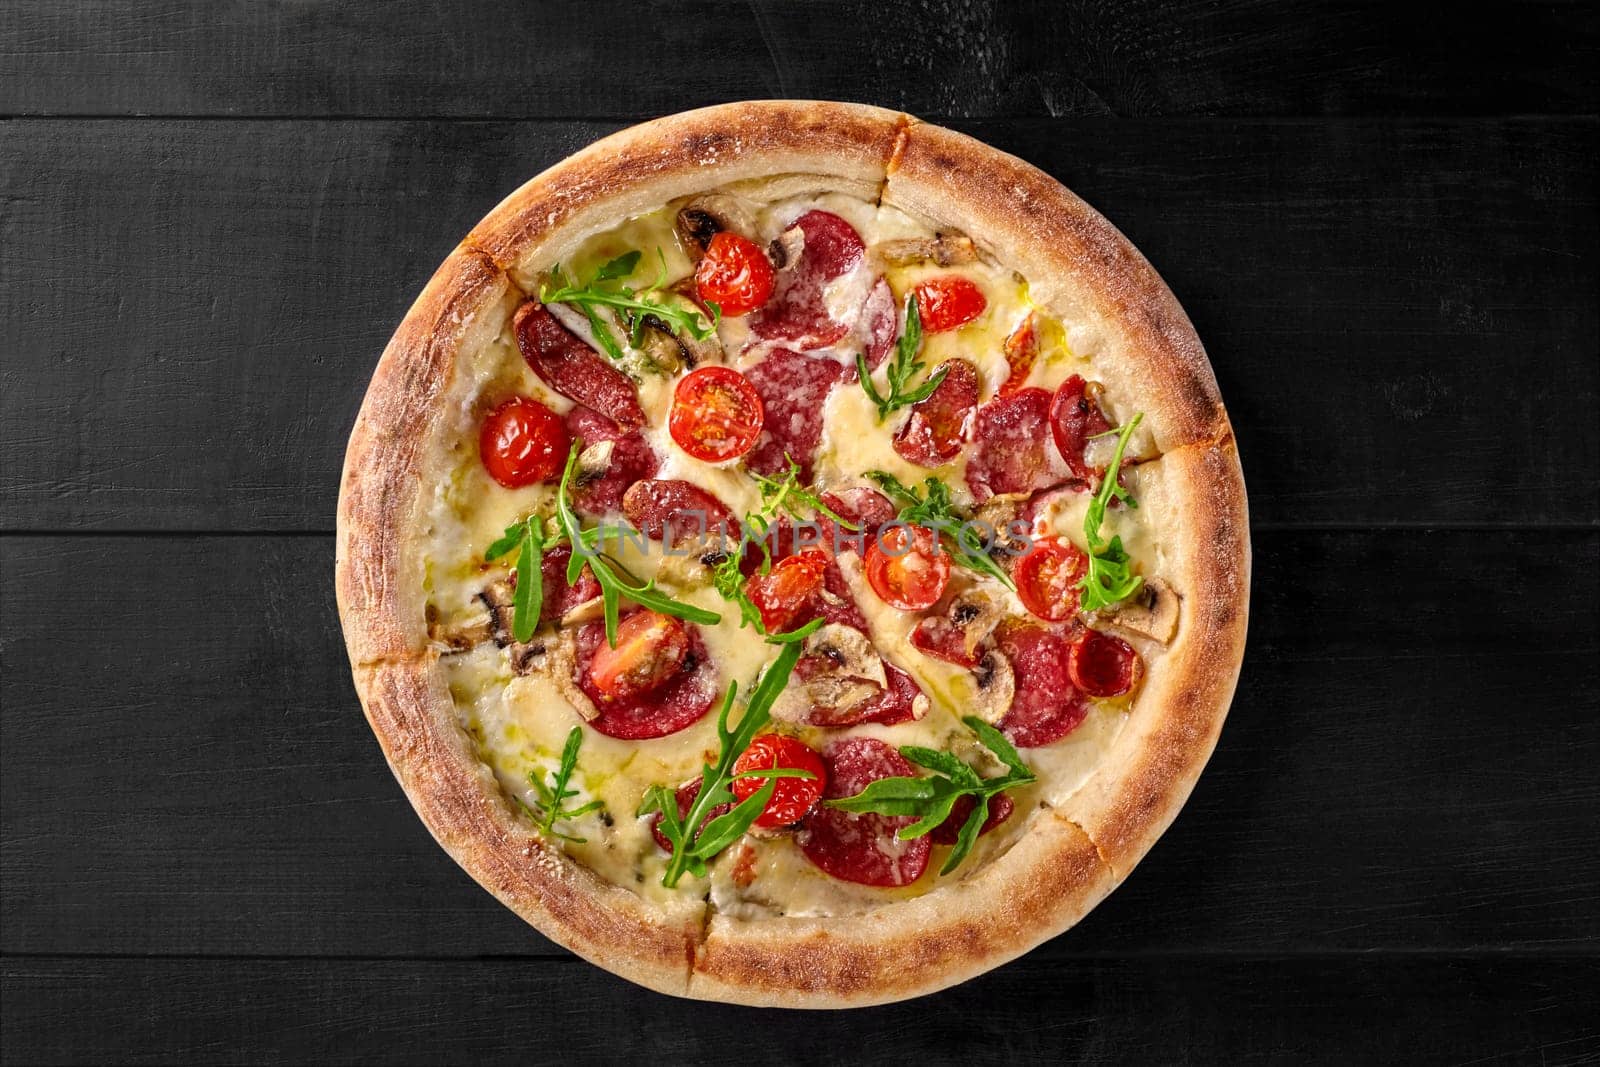 Delicious freshly baked Italian Boscaiola pizza with cream sauce, mozzarella, slices of cabanossi and salami, mushrooms, parmesan garnished with fresh arugula leaves on black wooden surface